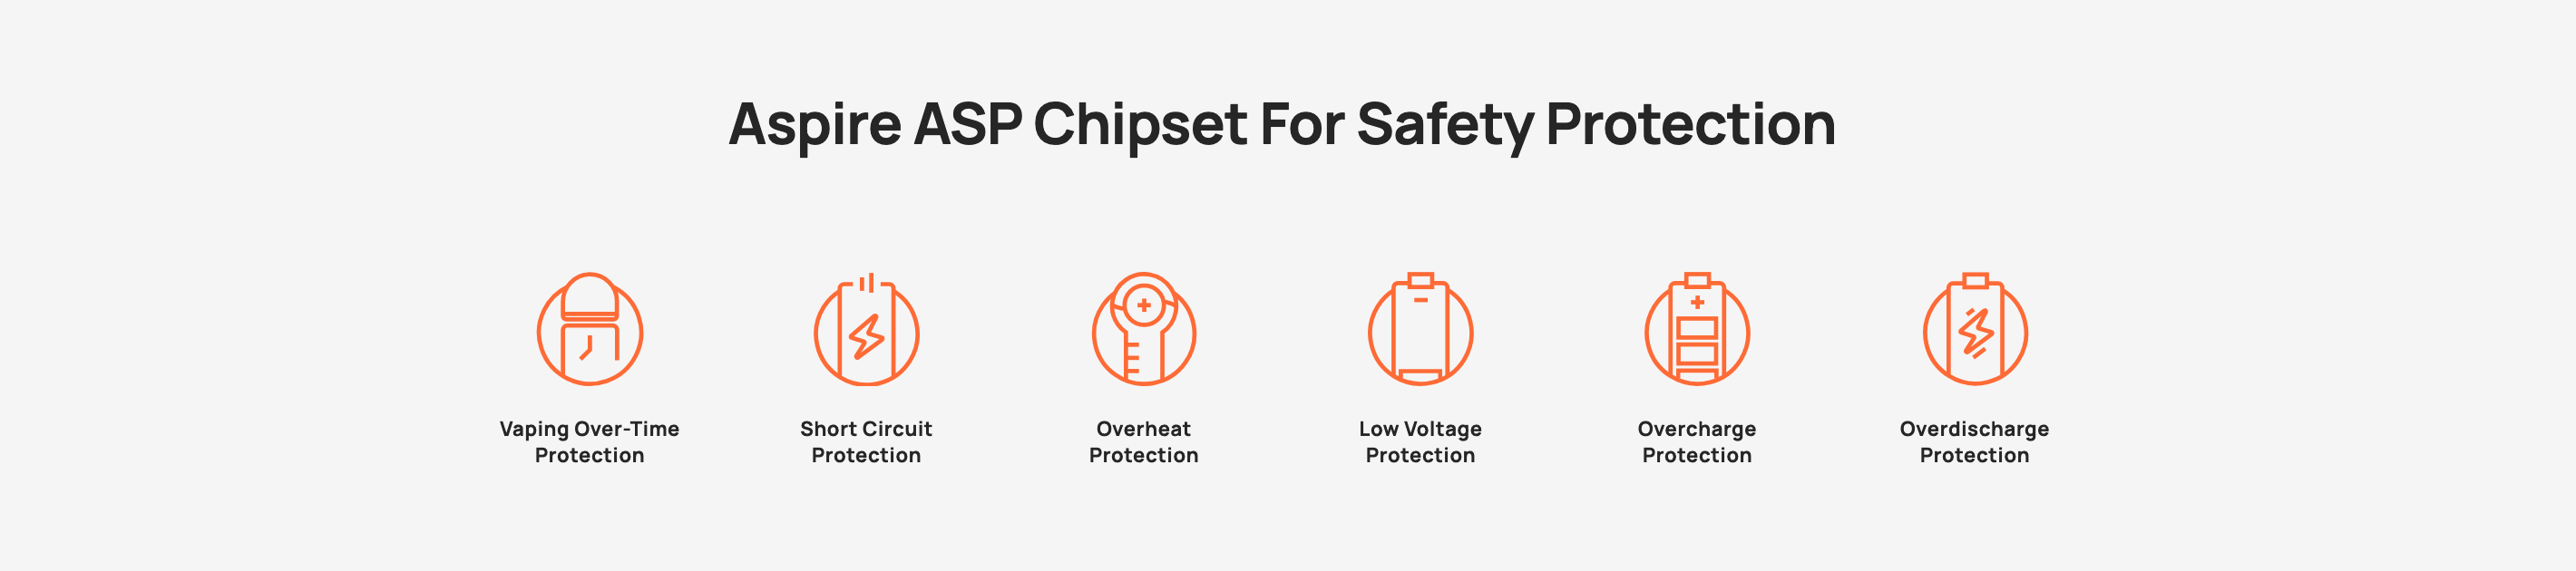 Aspire ASP Chipset for Safety Protection | Vaping over time, short circuit, overheat, low voltage, overcharge and over-discharge protections